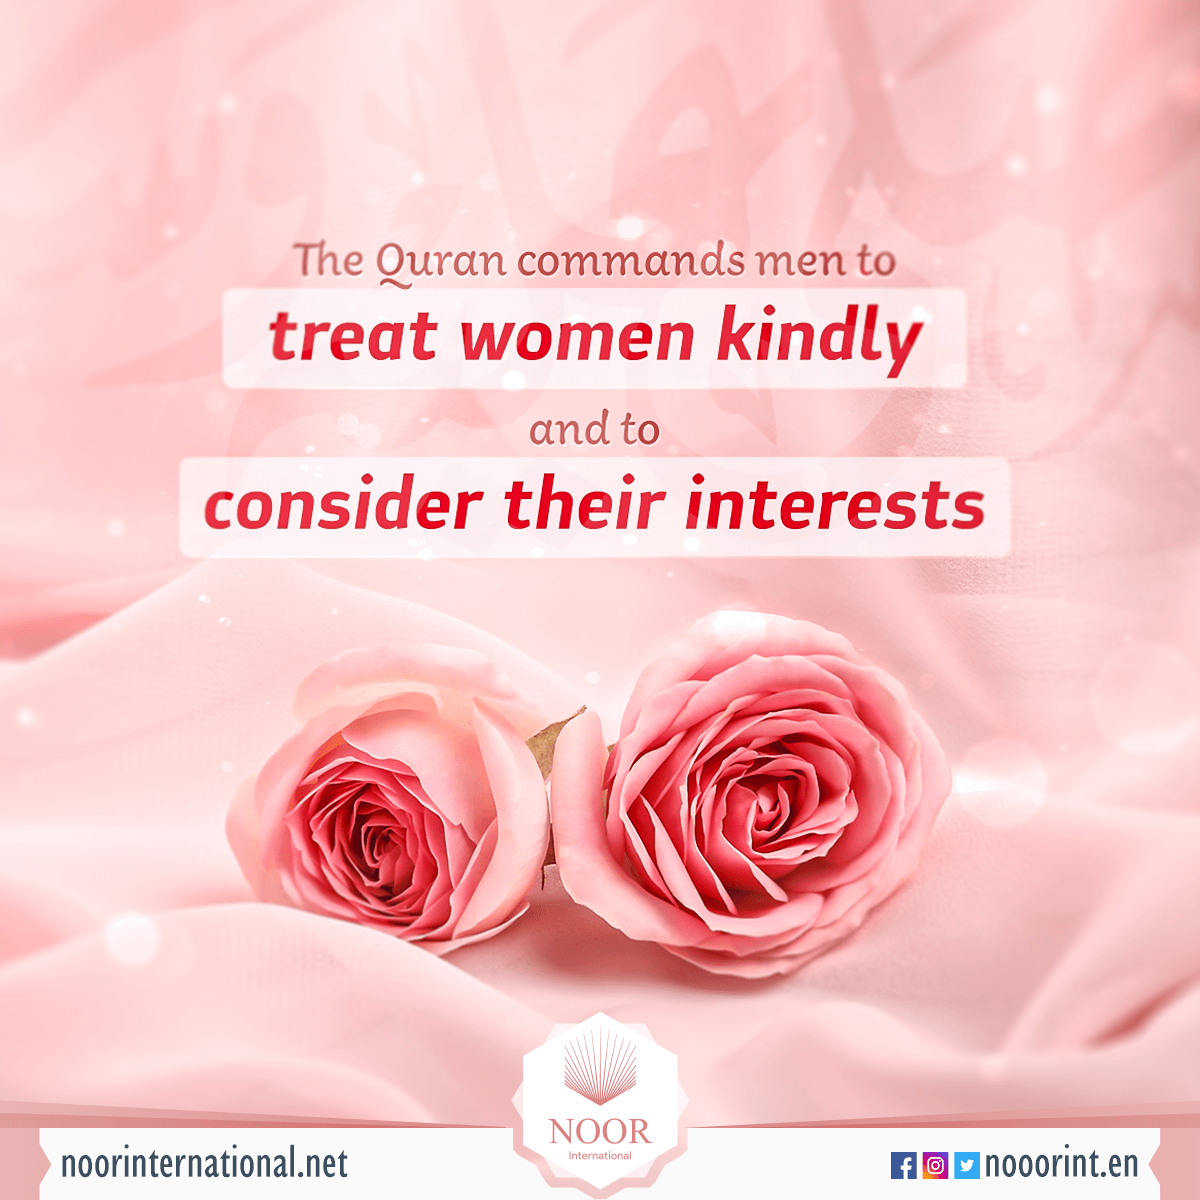 The Quran commands men to treat women kindly and to consider their interests